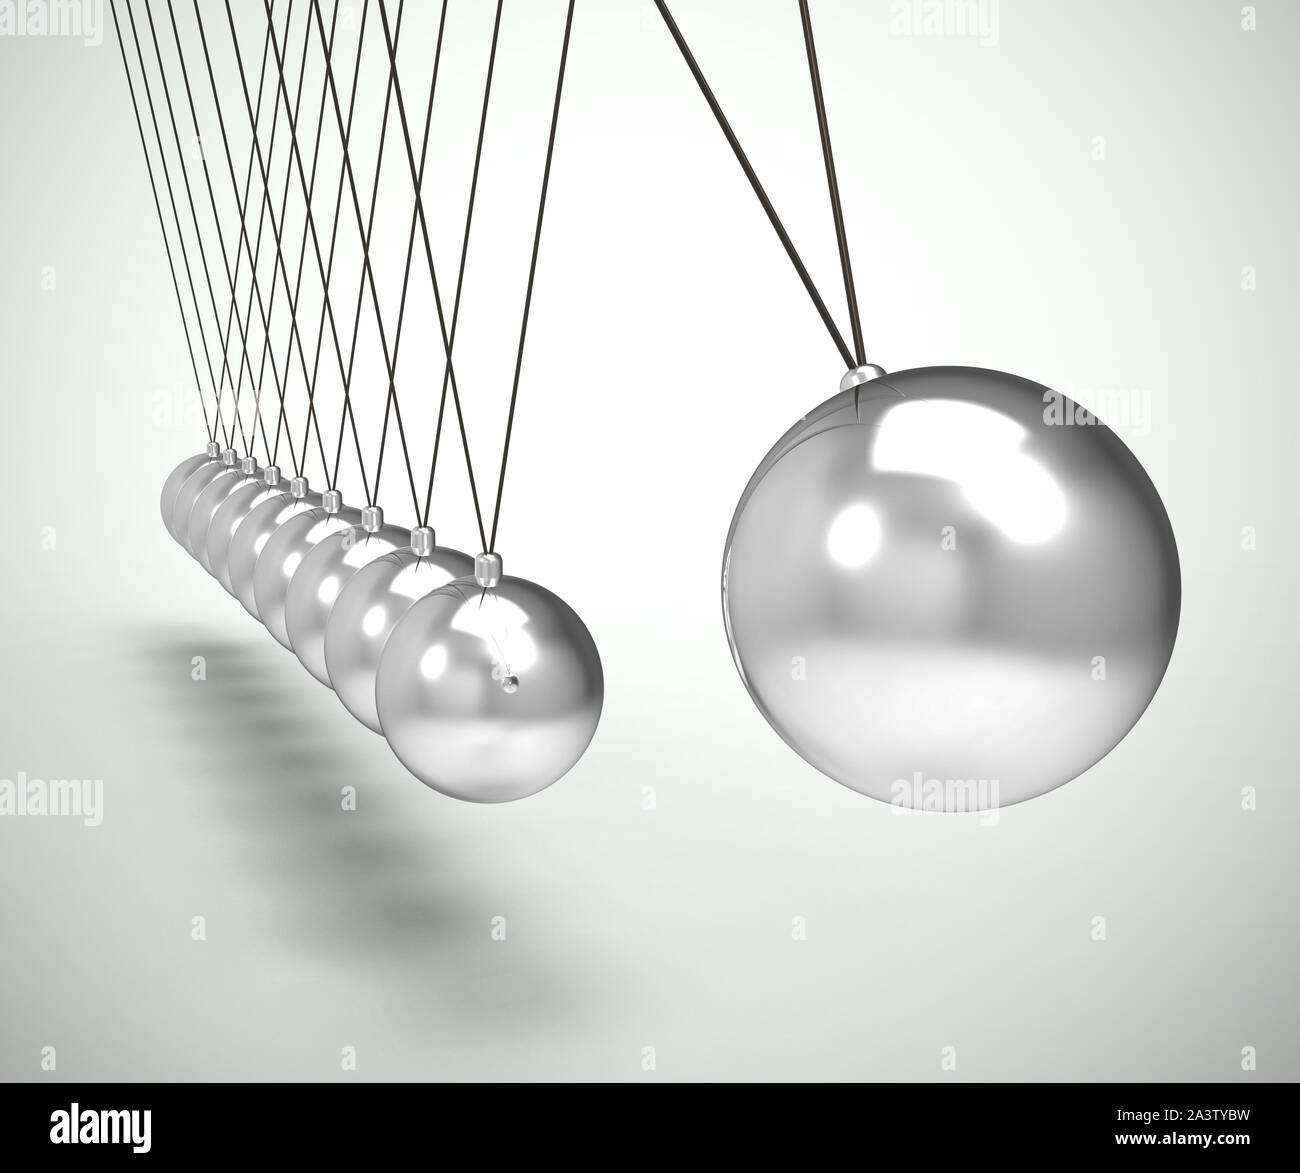 3d Rendering Of A Newton S Cradle With A Momentum Swing Movement